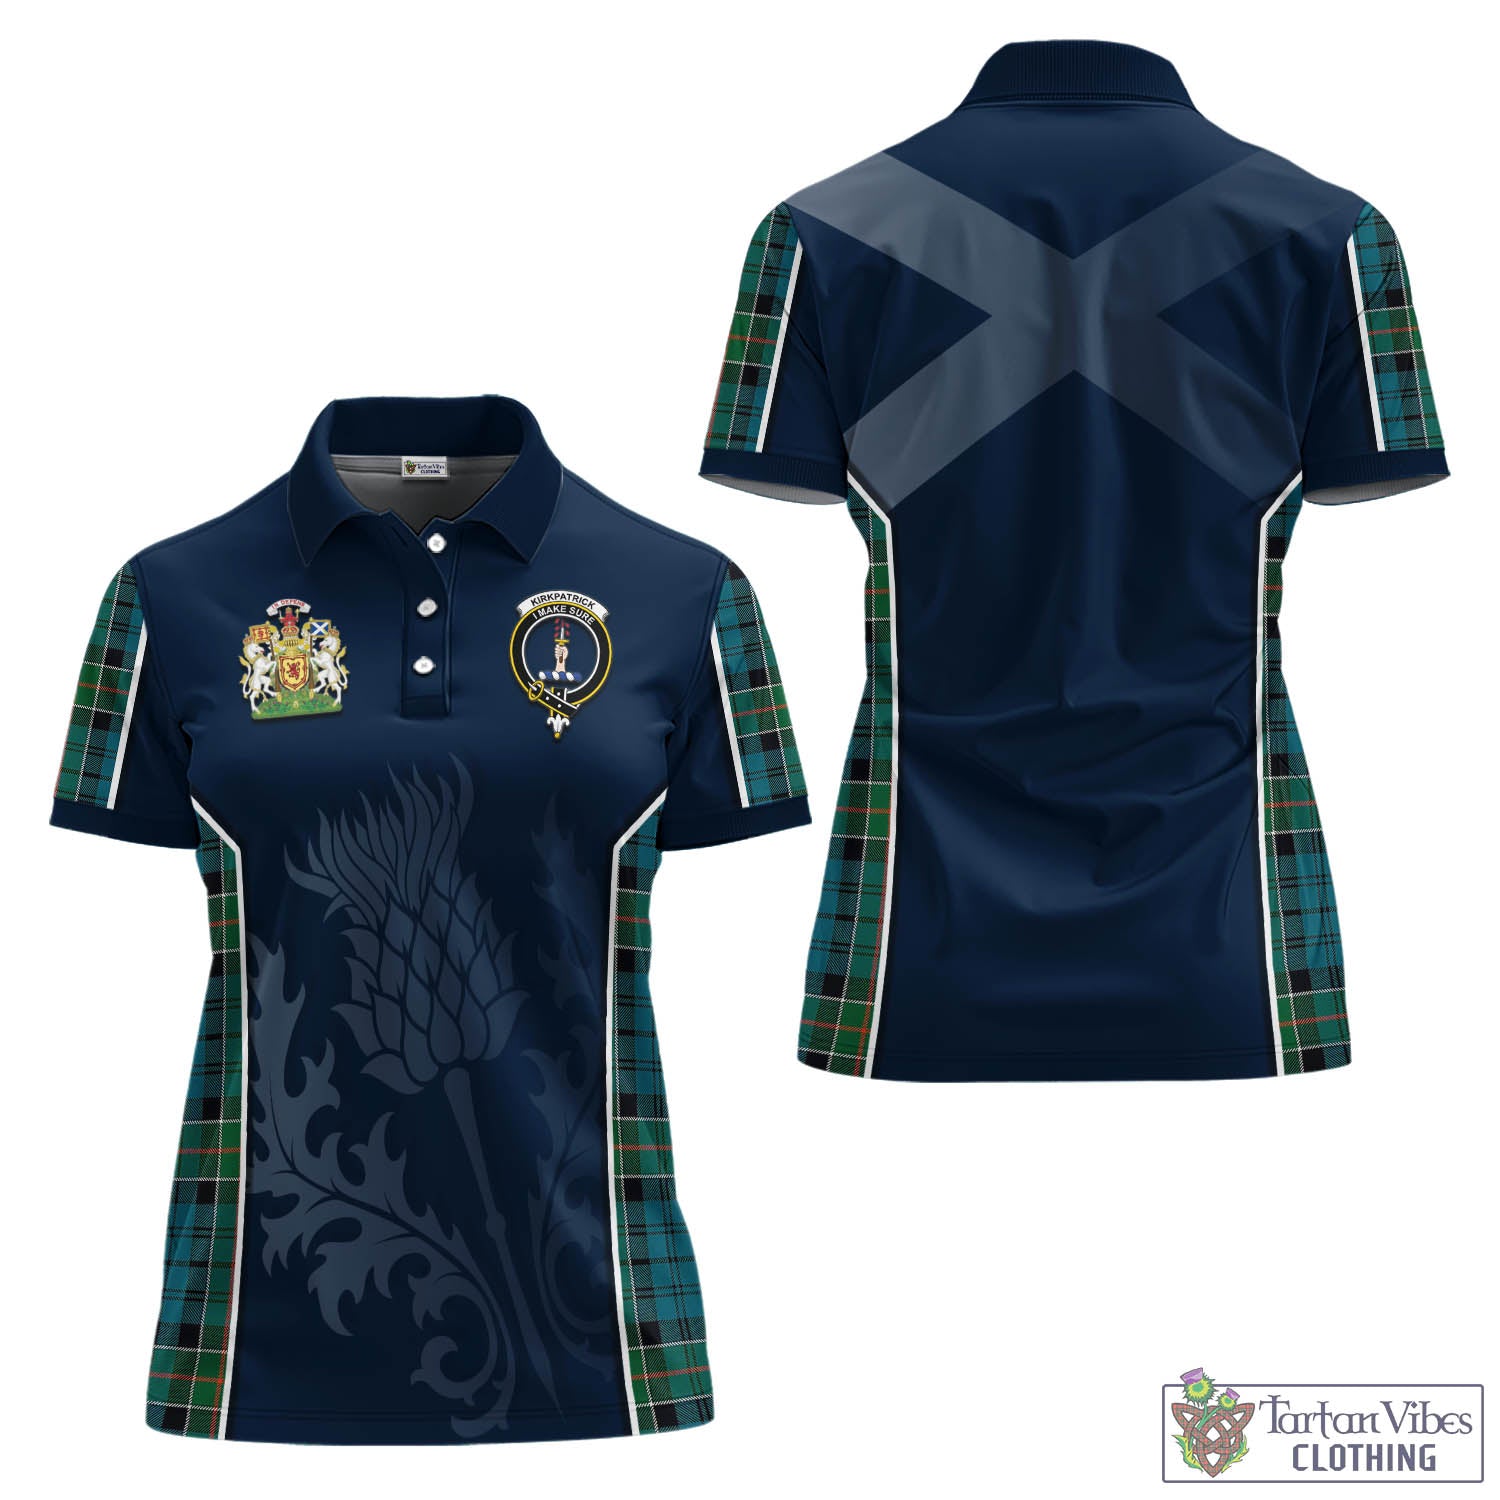 Tartan Vibes Clothing Kirkpatrick Tartan Women's Polo Shirt with Family Crest and Scottish Thistle Vibes Sport Style